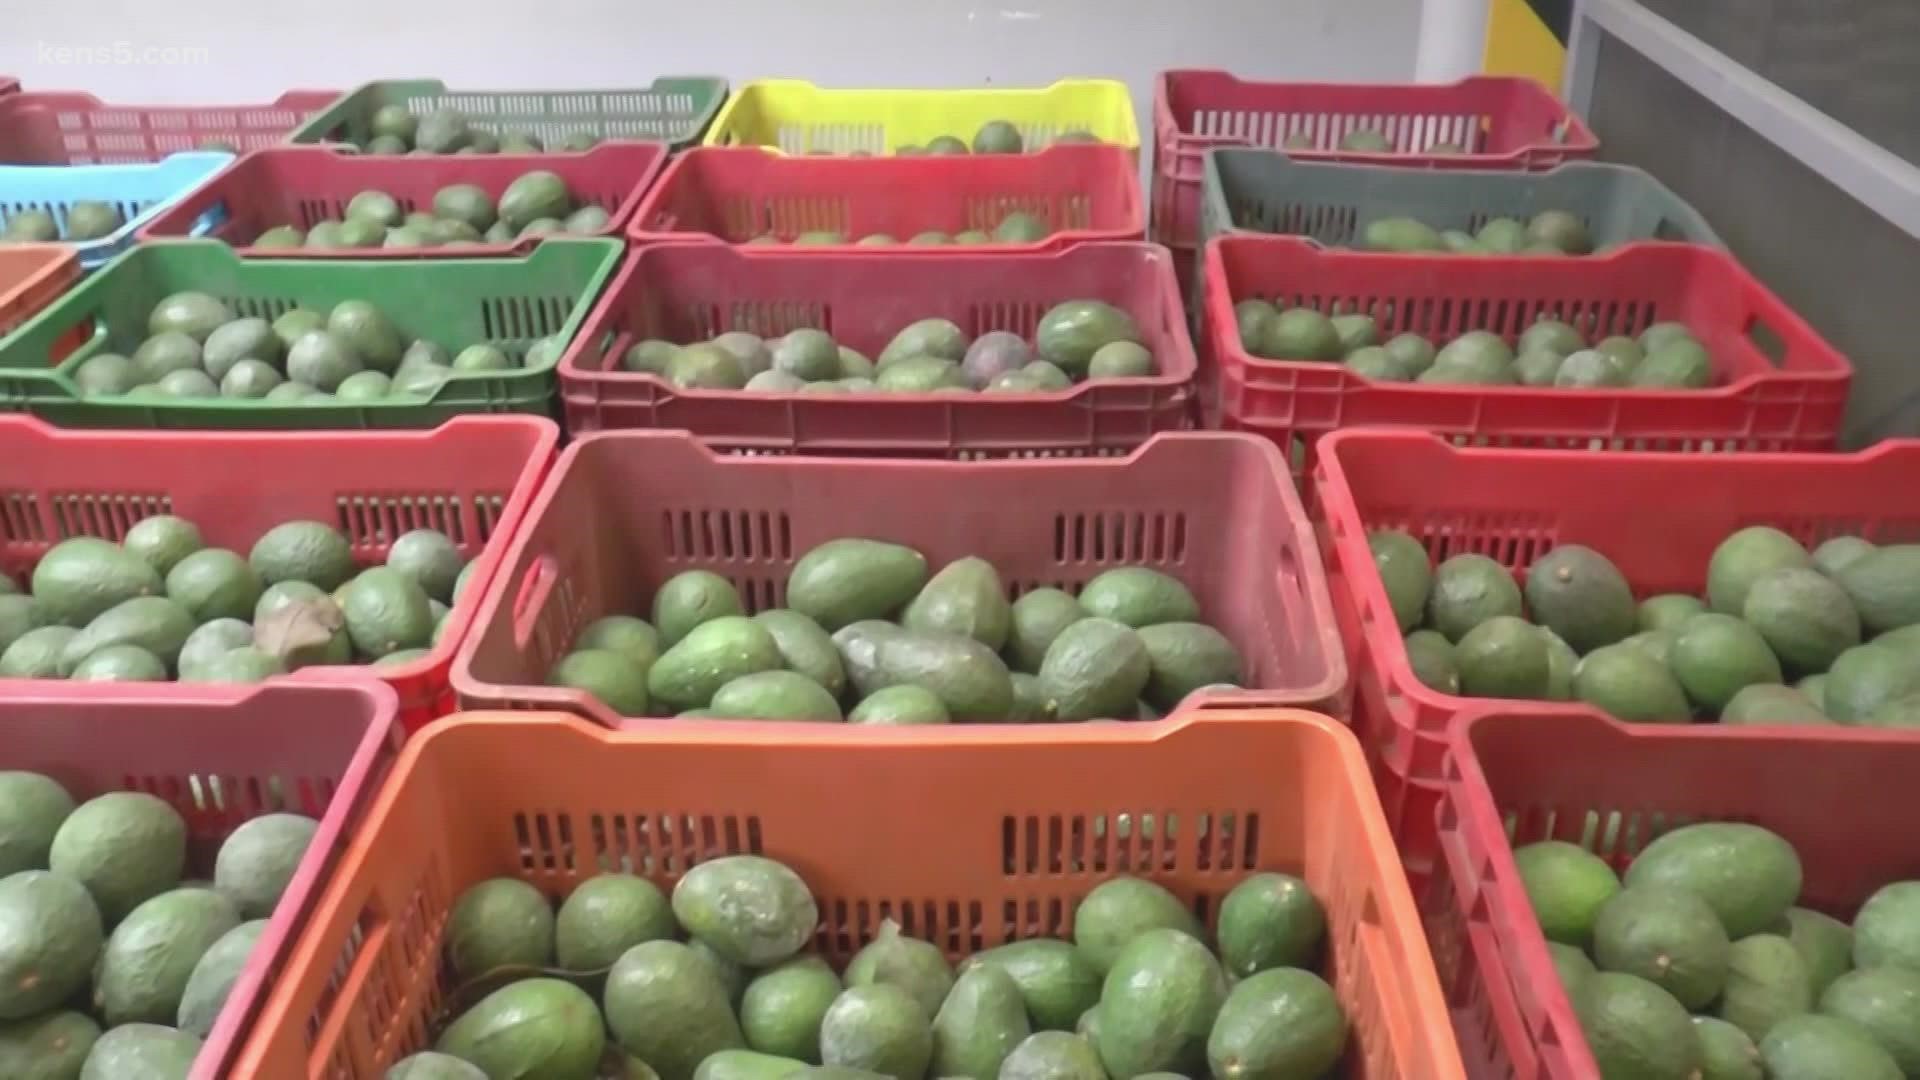 Avocado exports are the latest victim of the drug cartel turf battles and extortion of avocado growers, and price increases are expected.